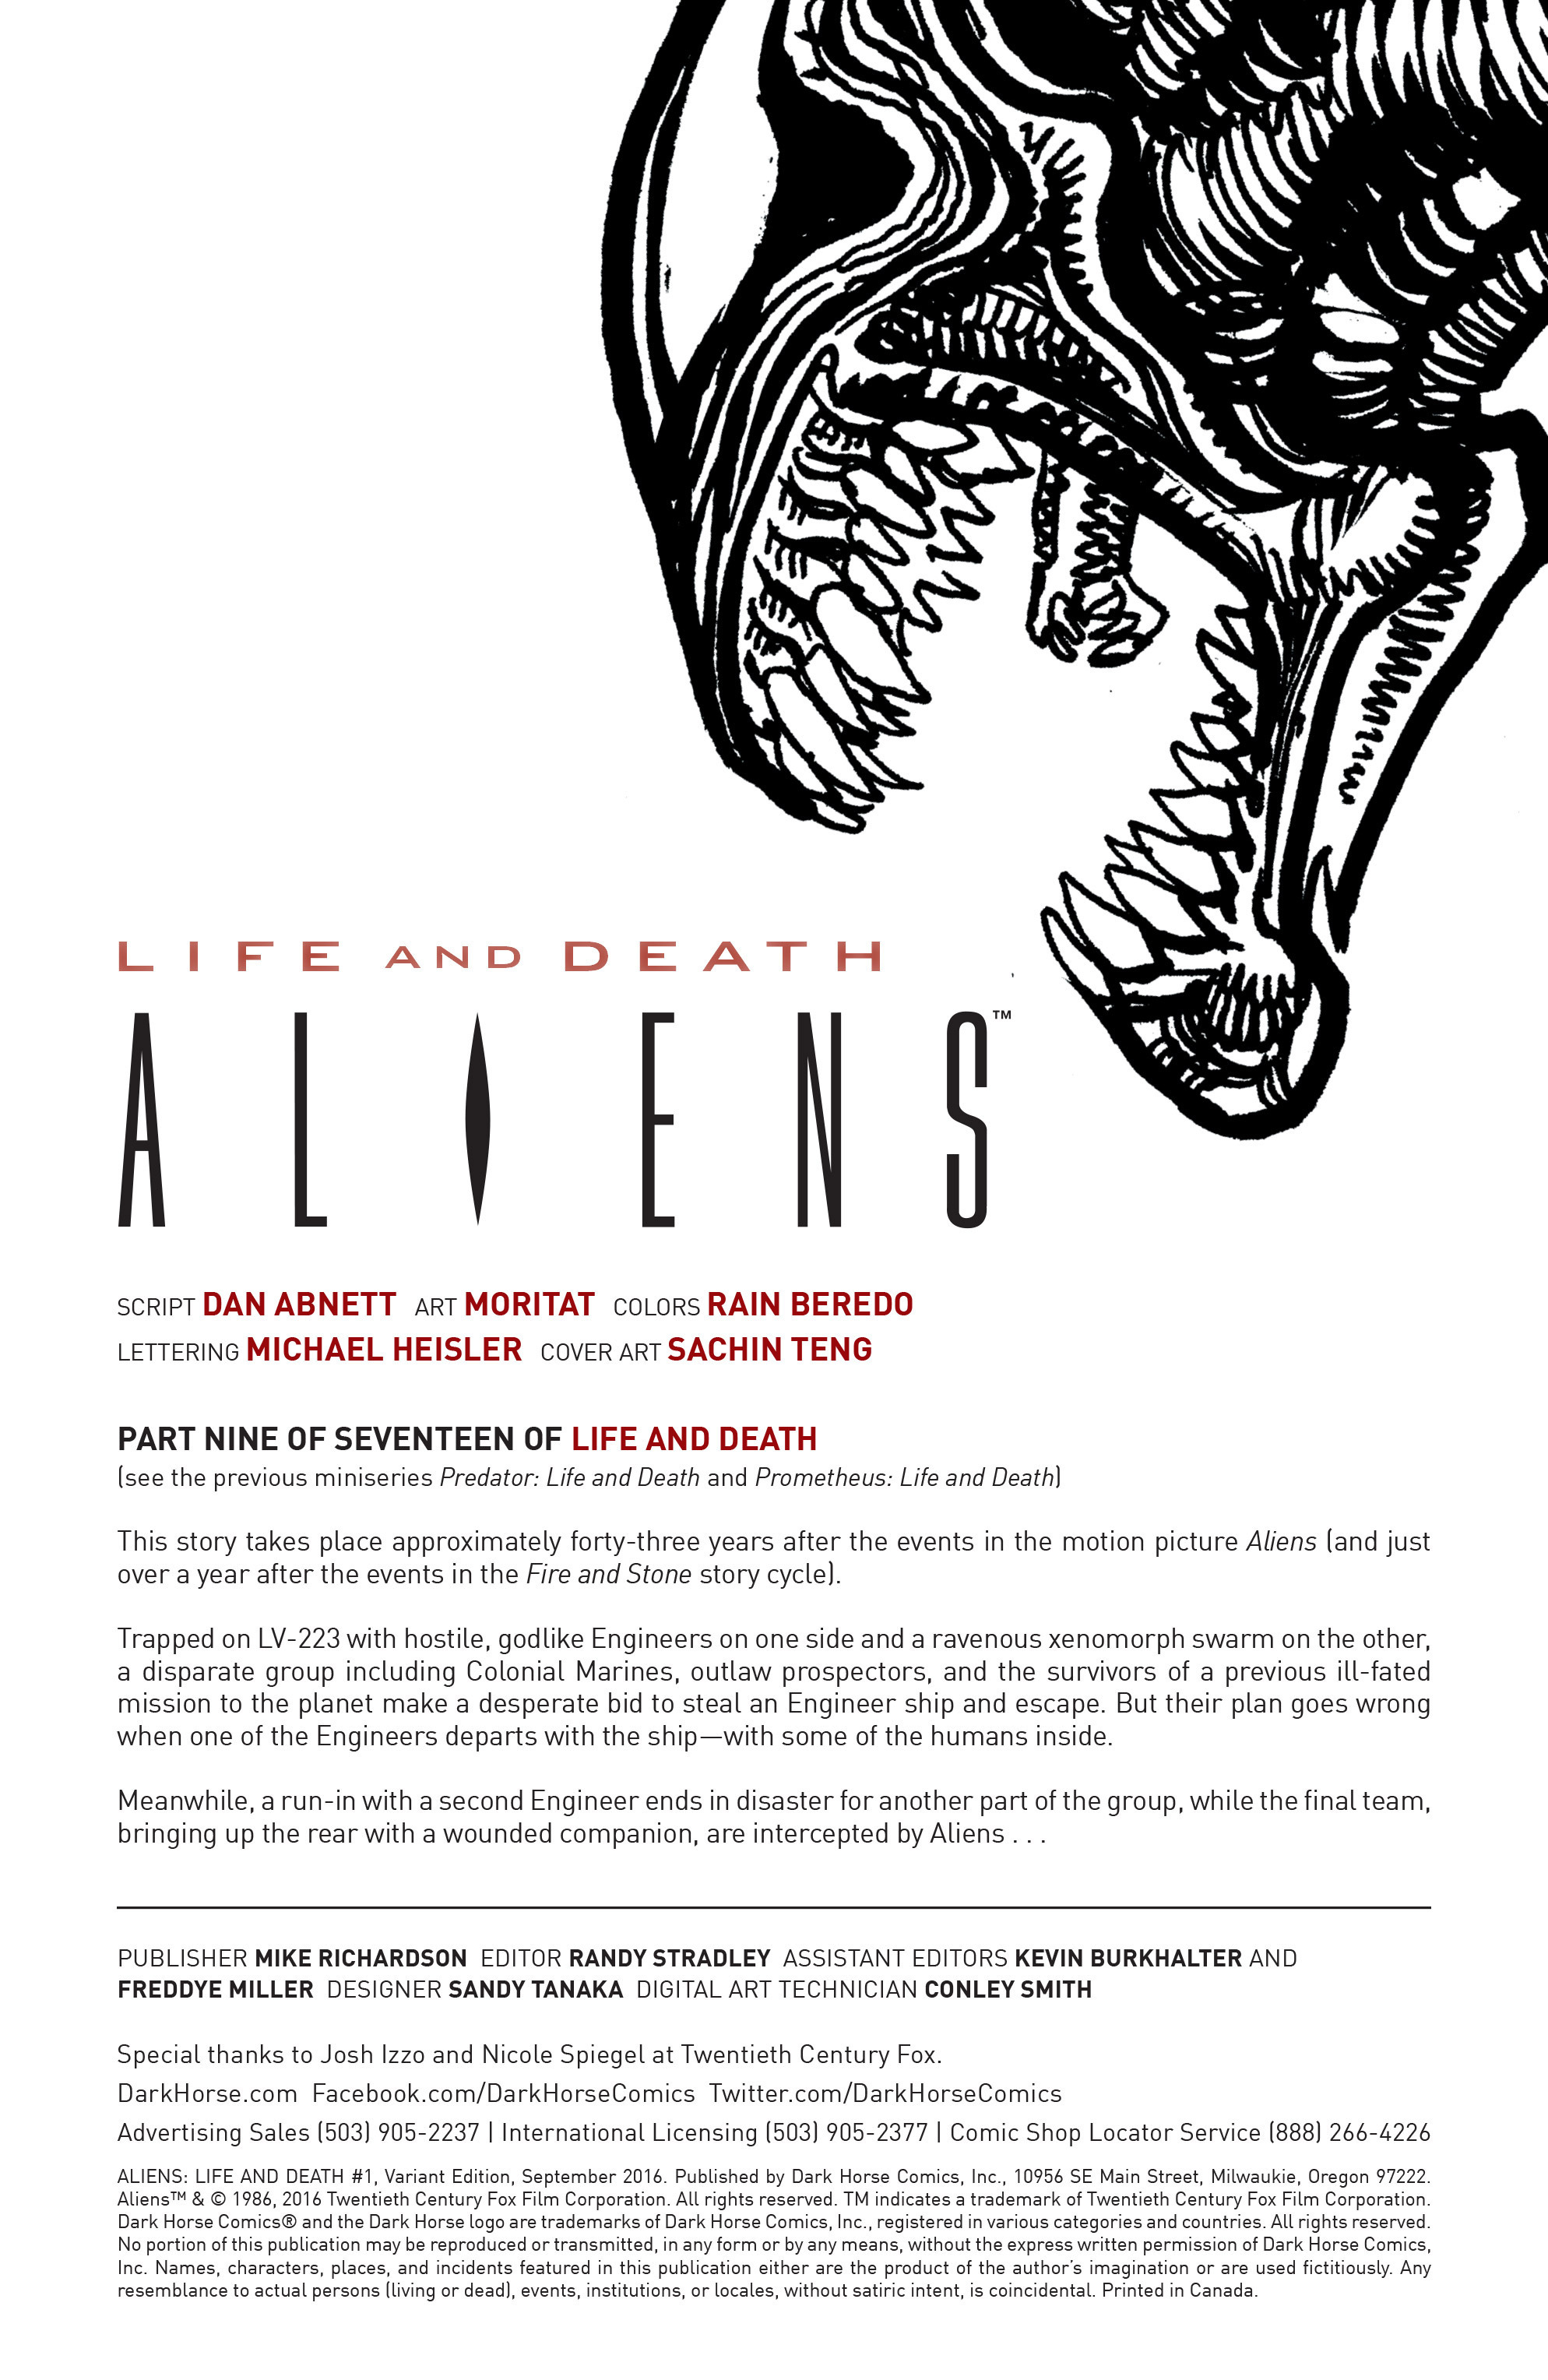 Read online Aliens: Life And Death comic -  Issue #1 - 4